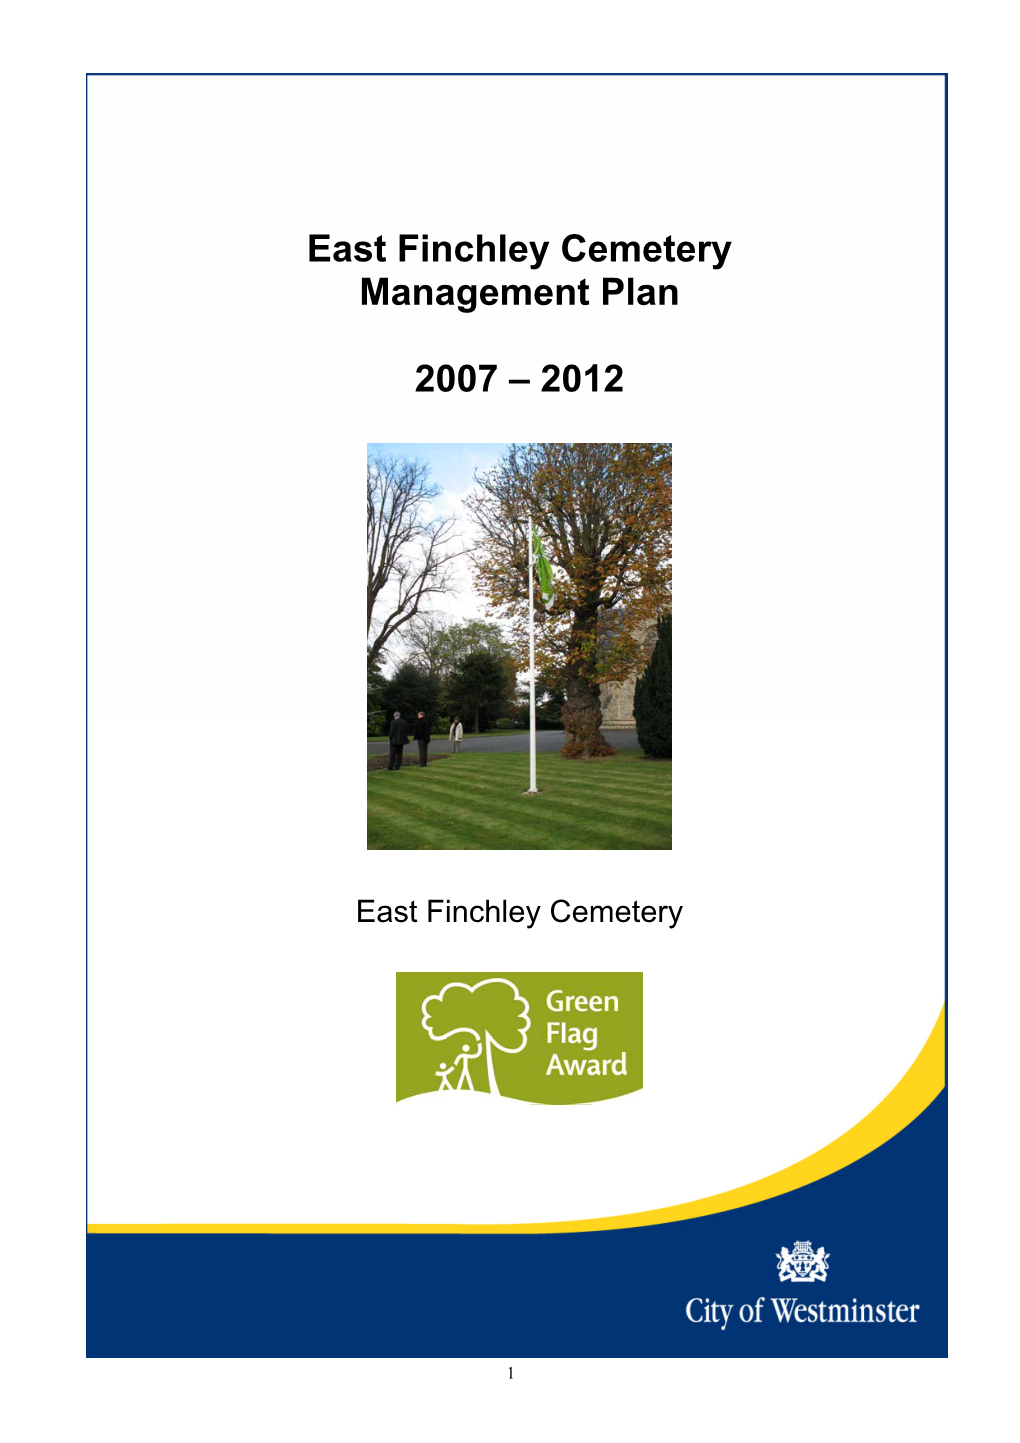 East Finchley Cemetery Management Plan 2007 – 2012